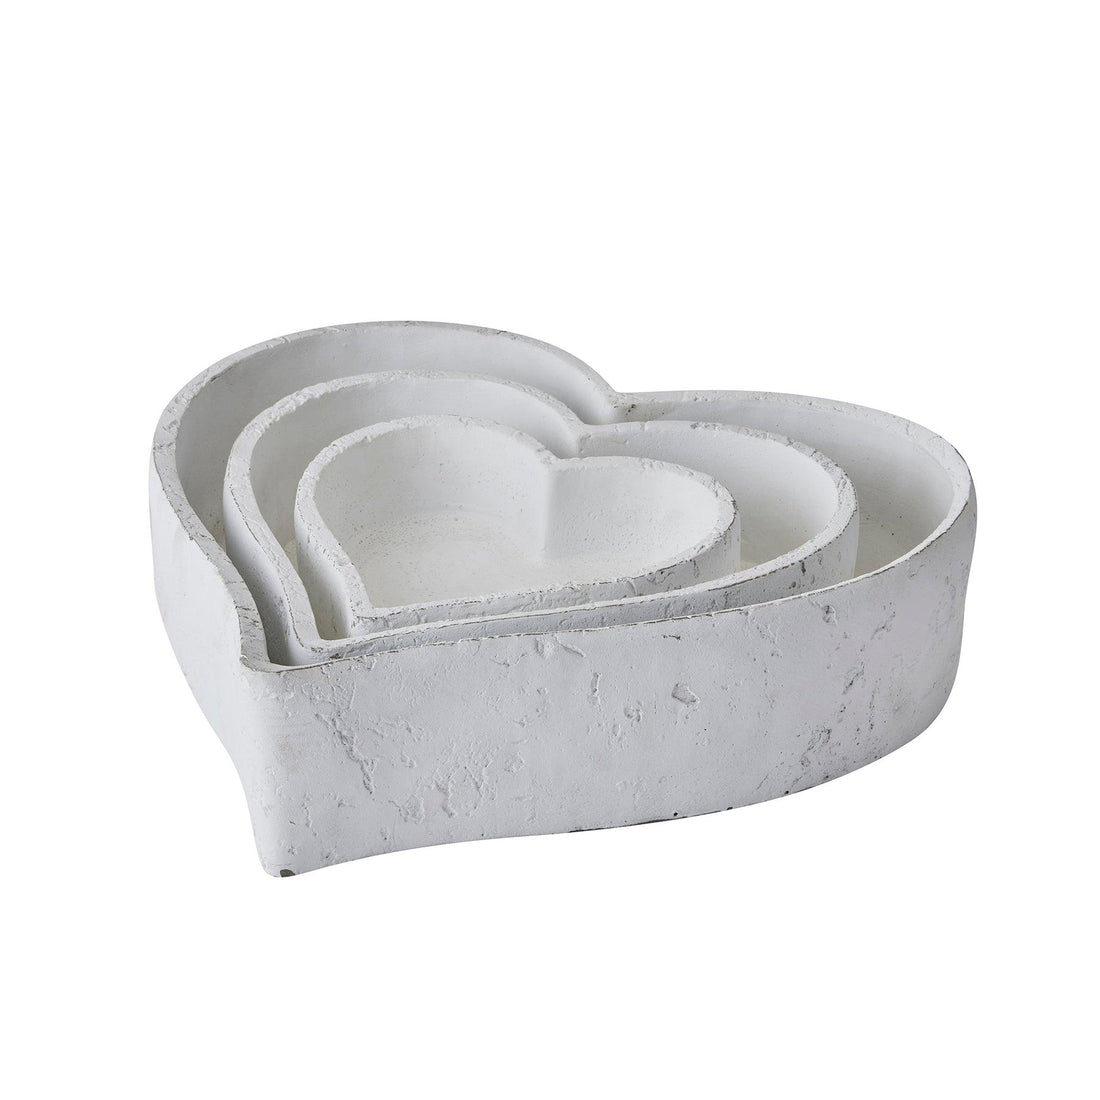 Set Of Three Large Matt White Ceramic Dishes - £79.95 - Gifts & Accessories > Kitchen And Tableware > Ornaments 